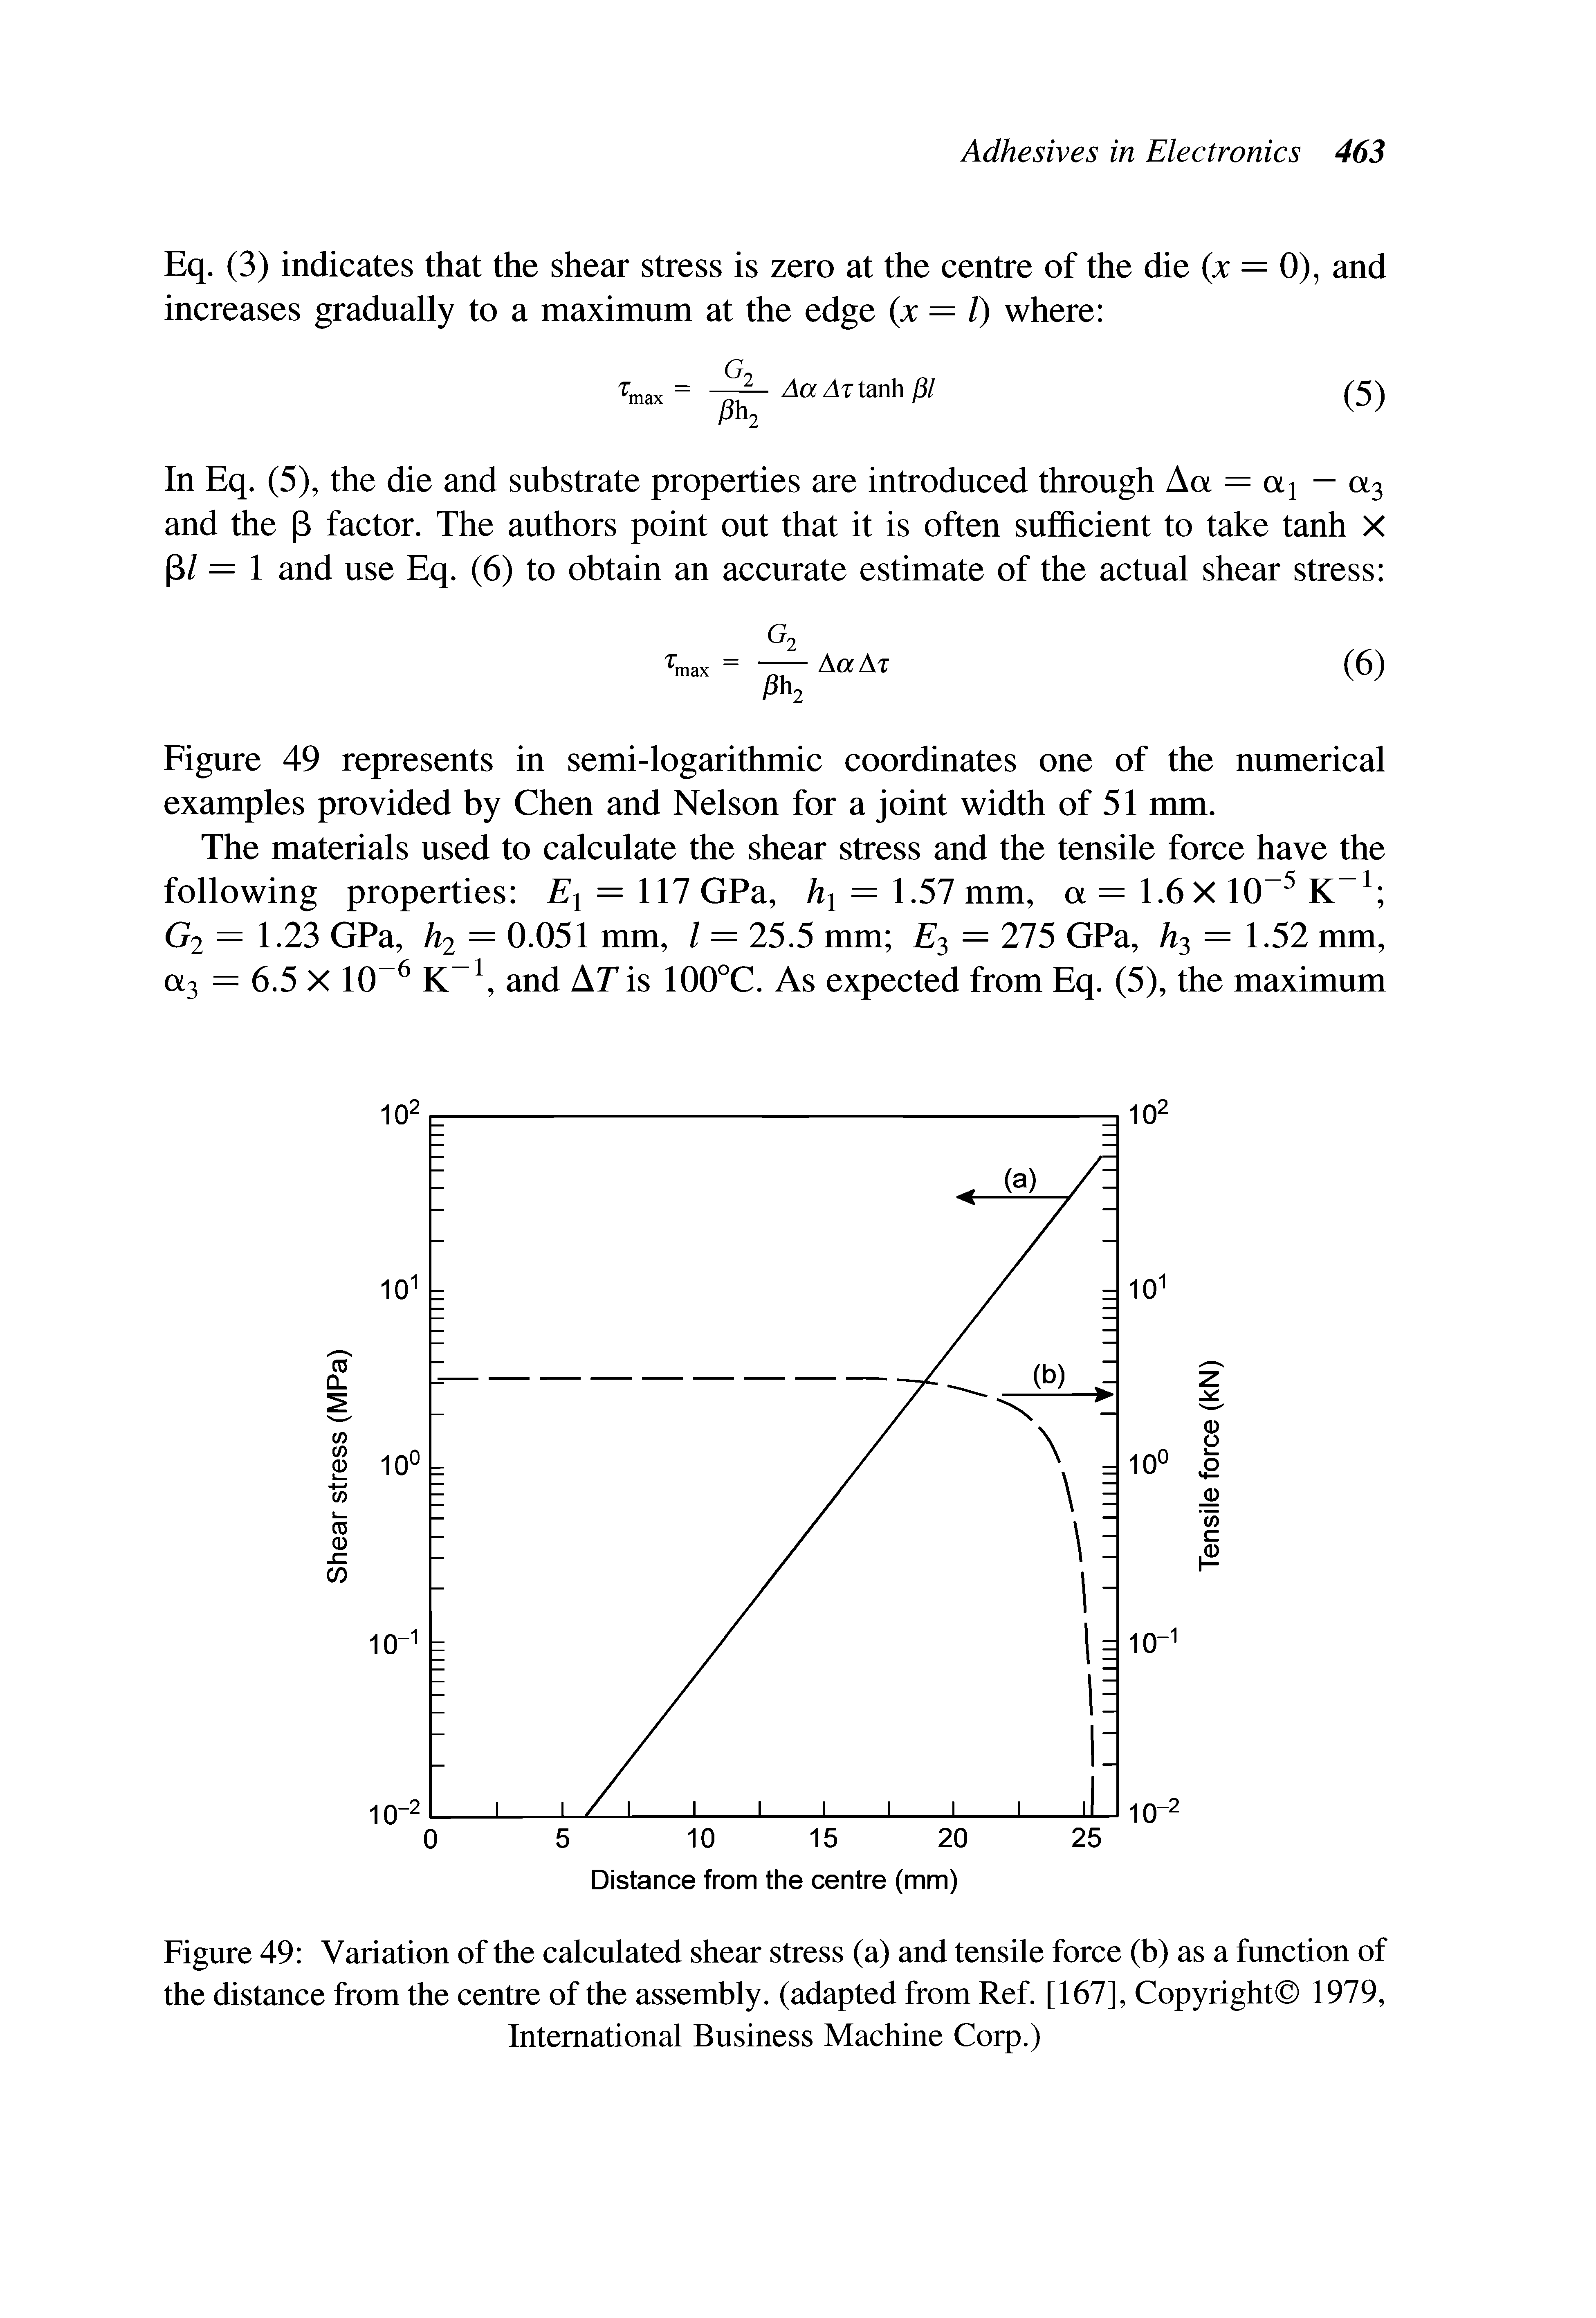 Figure 49 Variation of the calculated shear stress (a) and tensile force (b) as a function of the distance from the centre of the assembly, (adapted from Ref. [167], Copyright 1979, International Business Machine Corp.)...